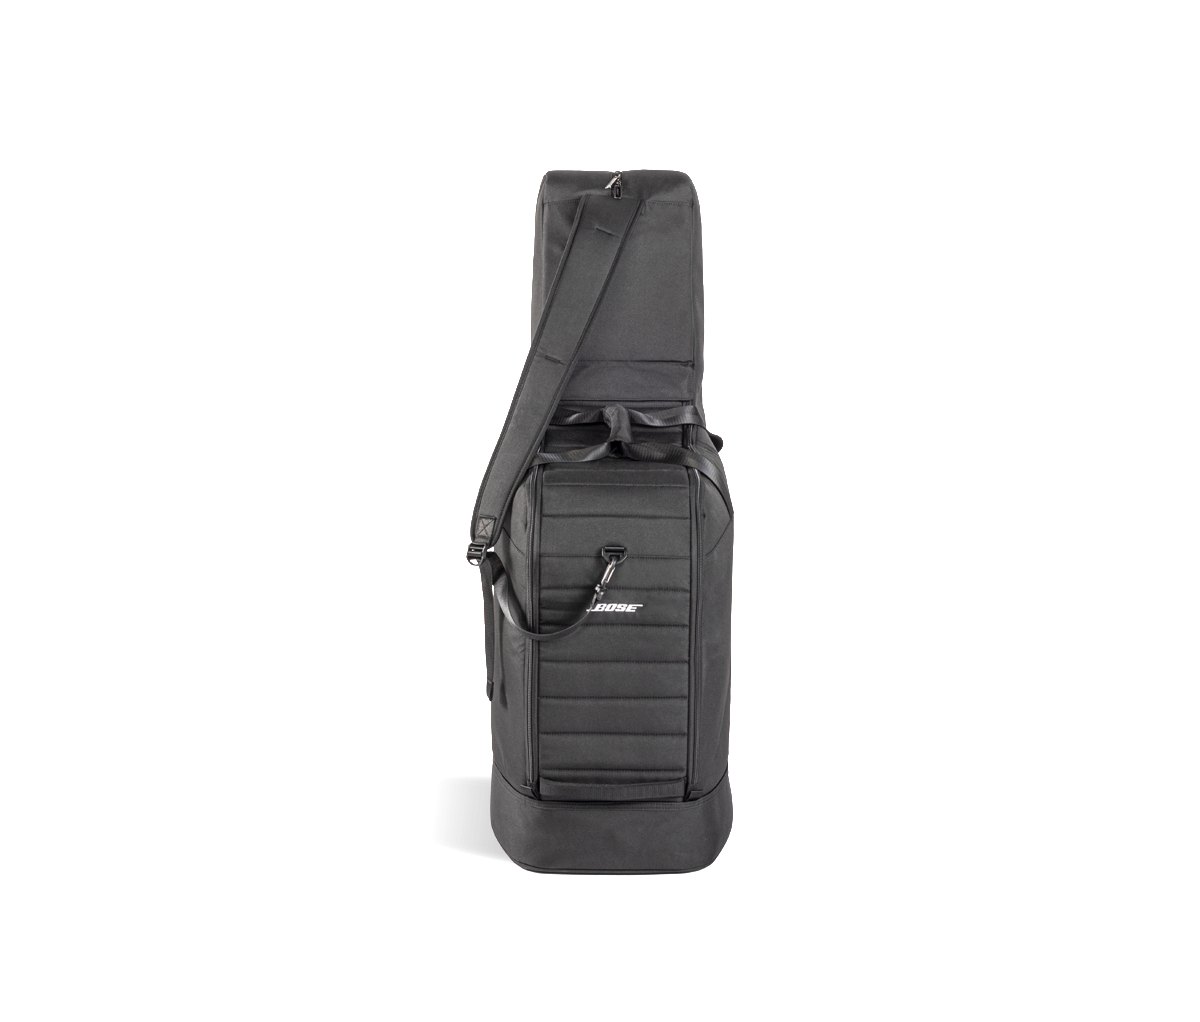 L1 Pro8 SystemBag frontal